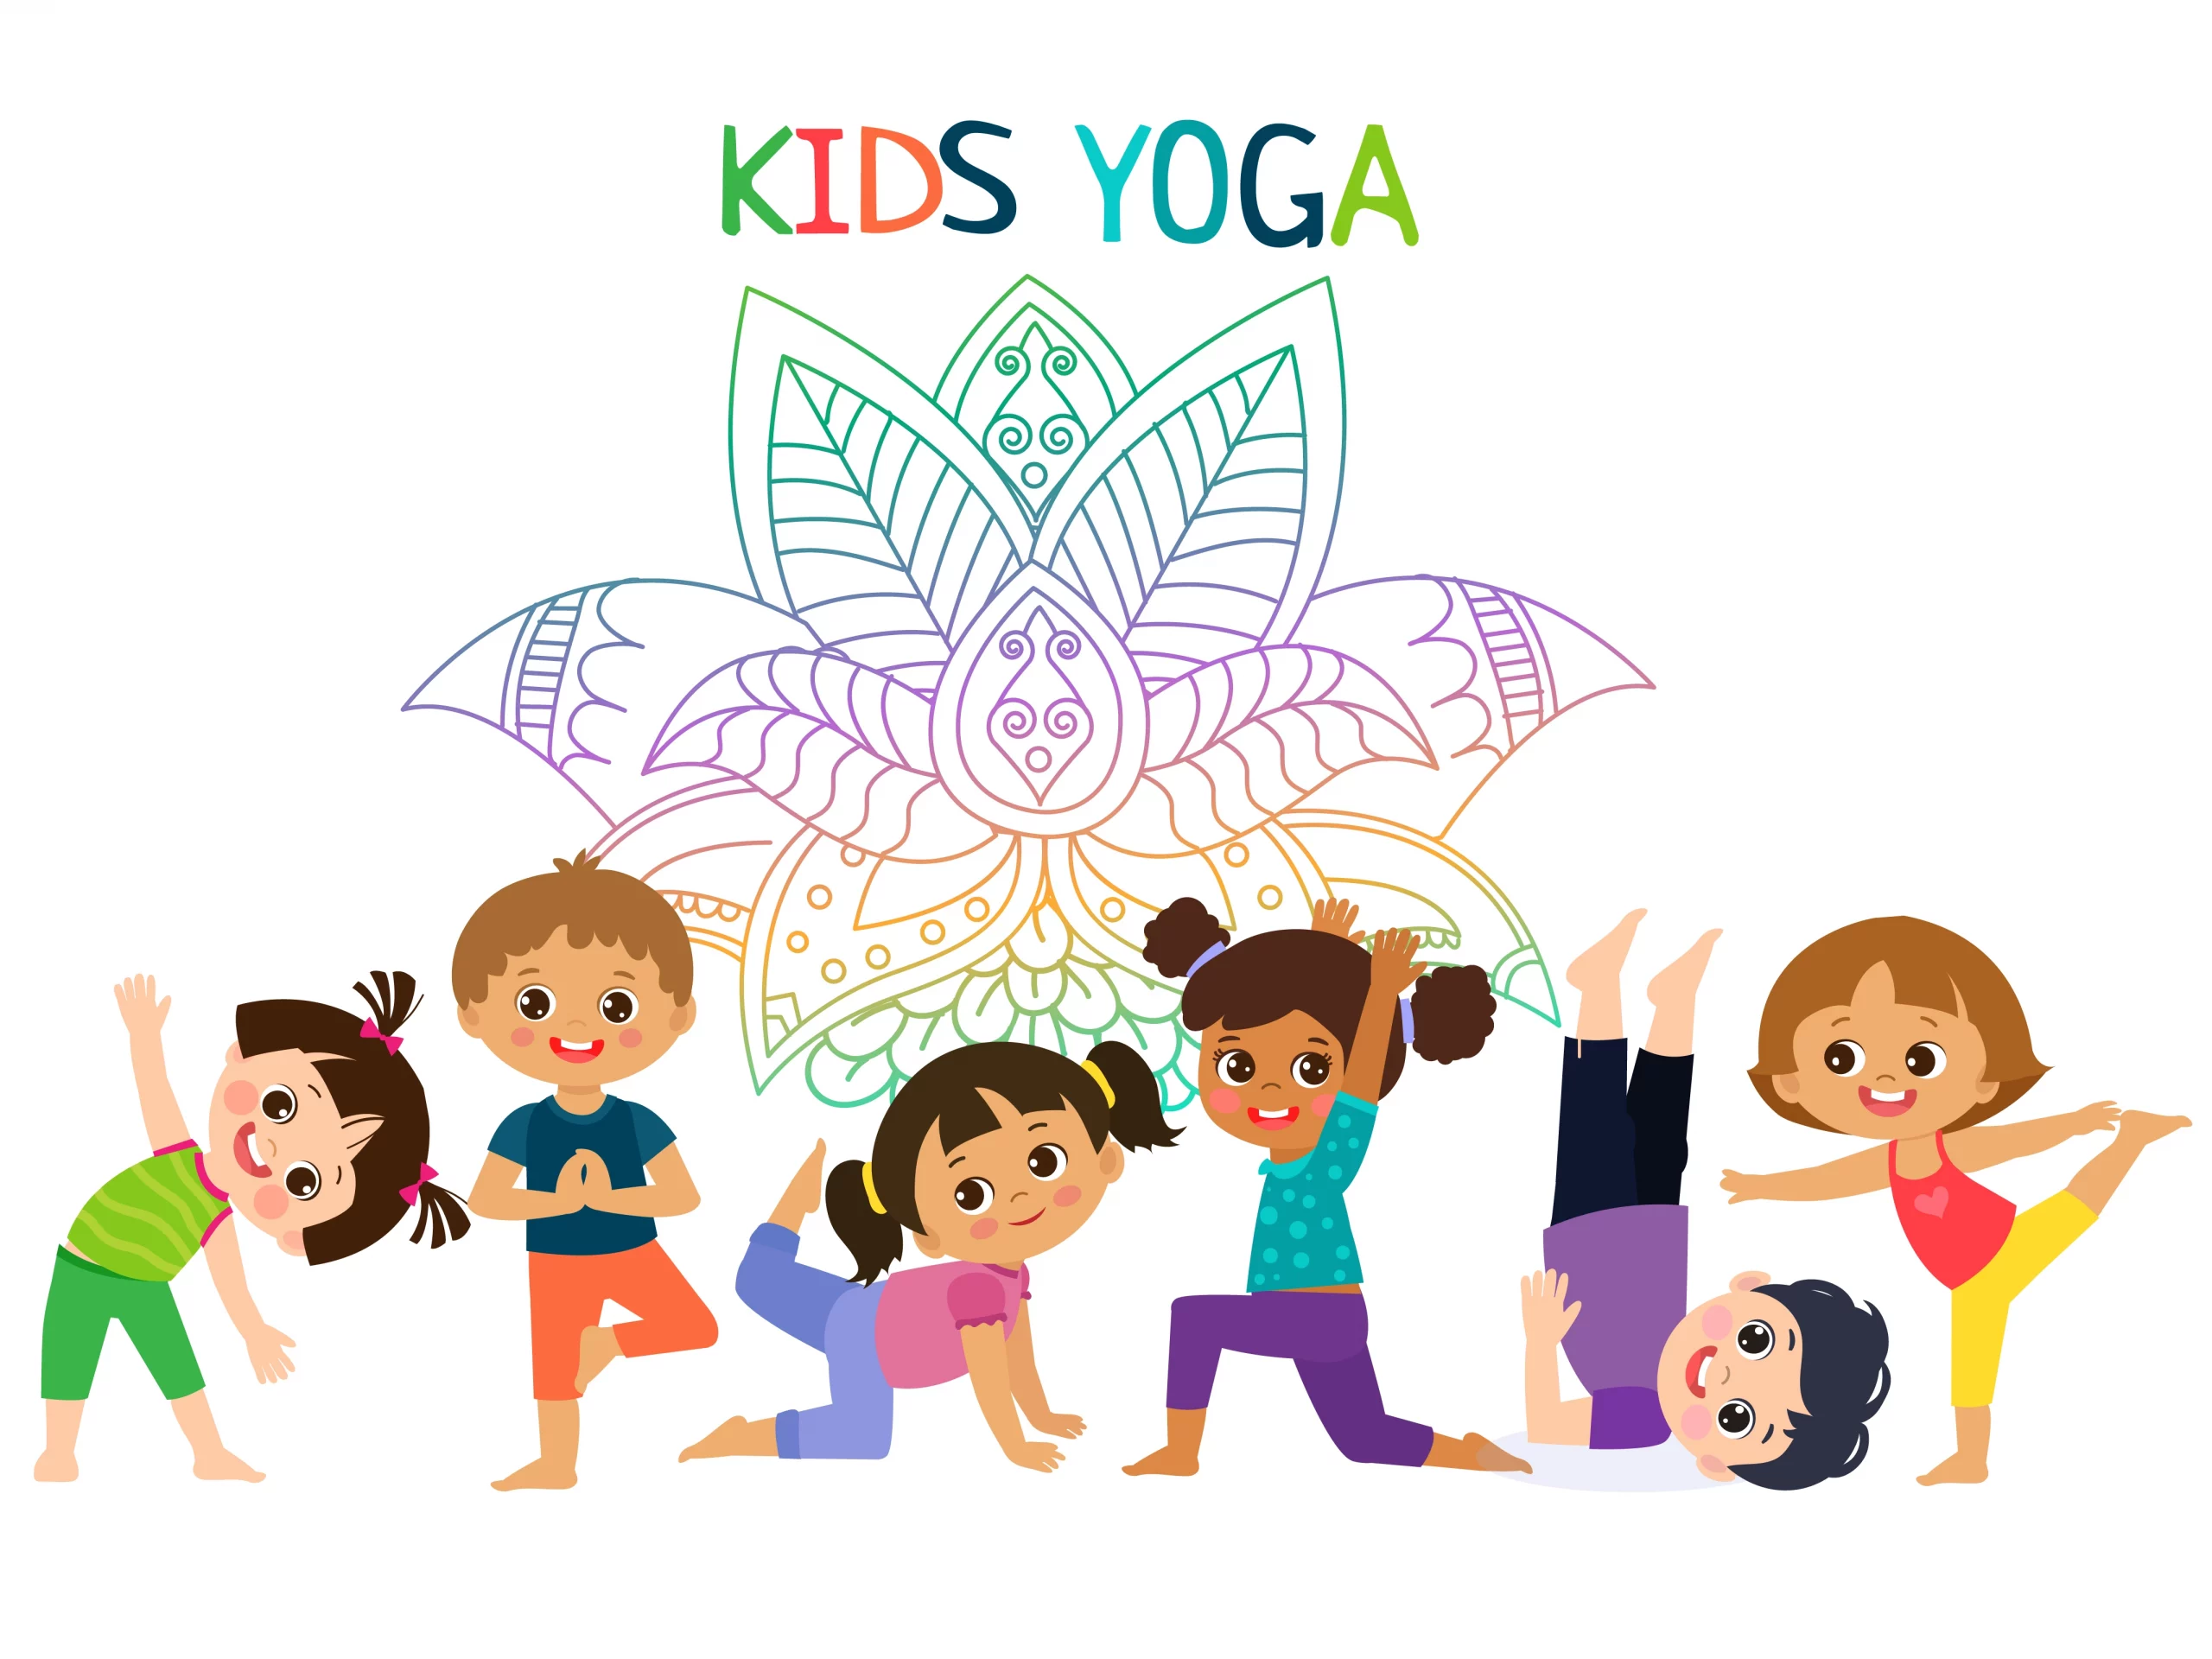 NEW: YOGA FOR CHILDREN AND ADULTS